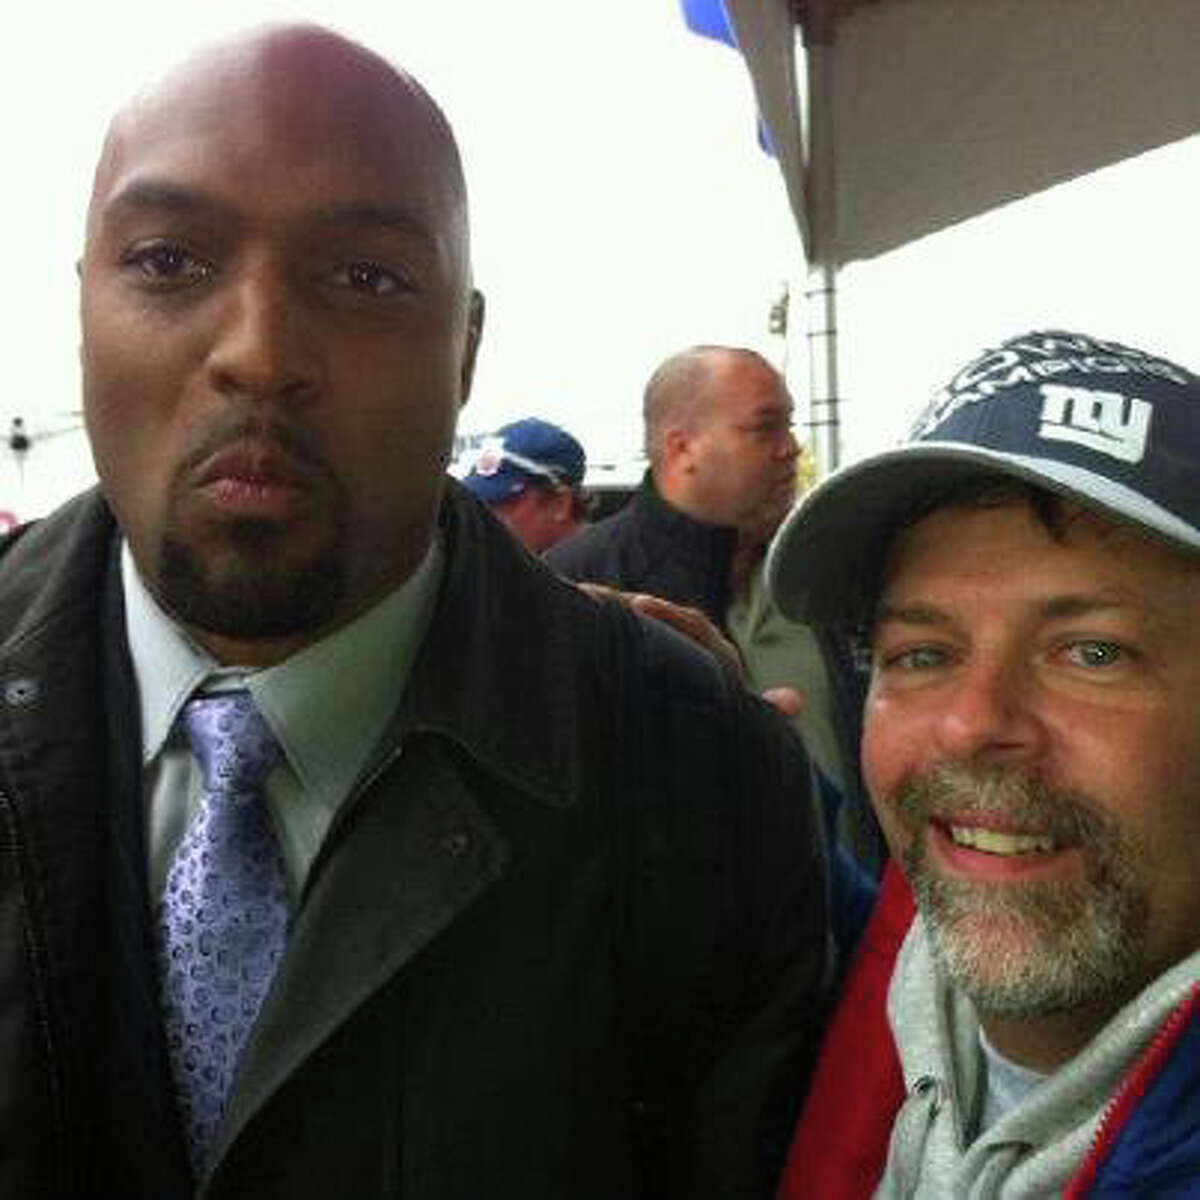 Former New York Giant Amani Toomer and Long Island Giants fan Anthony Scorcia after the Giants win over the Cleveland Browns on Oct. 7, 2012. Scorcia gave away an extra ticket to a fan who lost his -- and got invited to a post-game tailgate where he got to meet some of his heroes. (Anthony Scorcia)